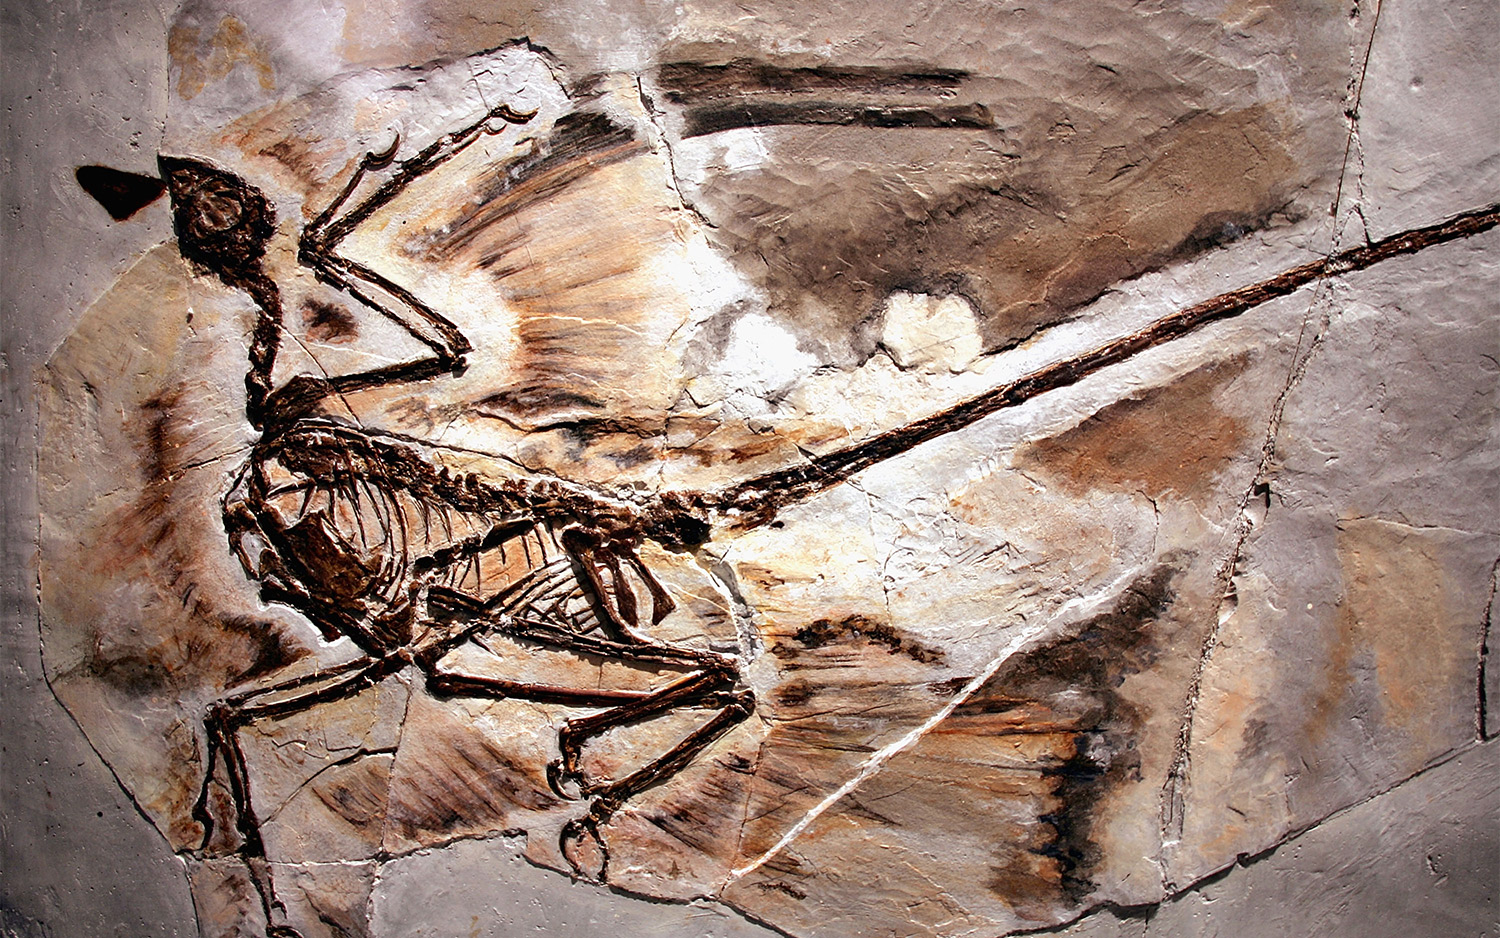 Exhibit Displays Newest Dinosaur Fossils Monsters, Real and 